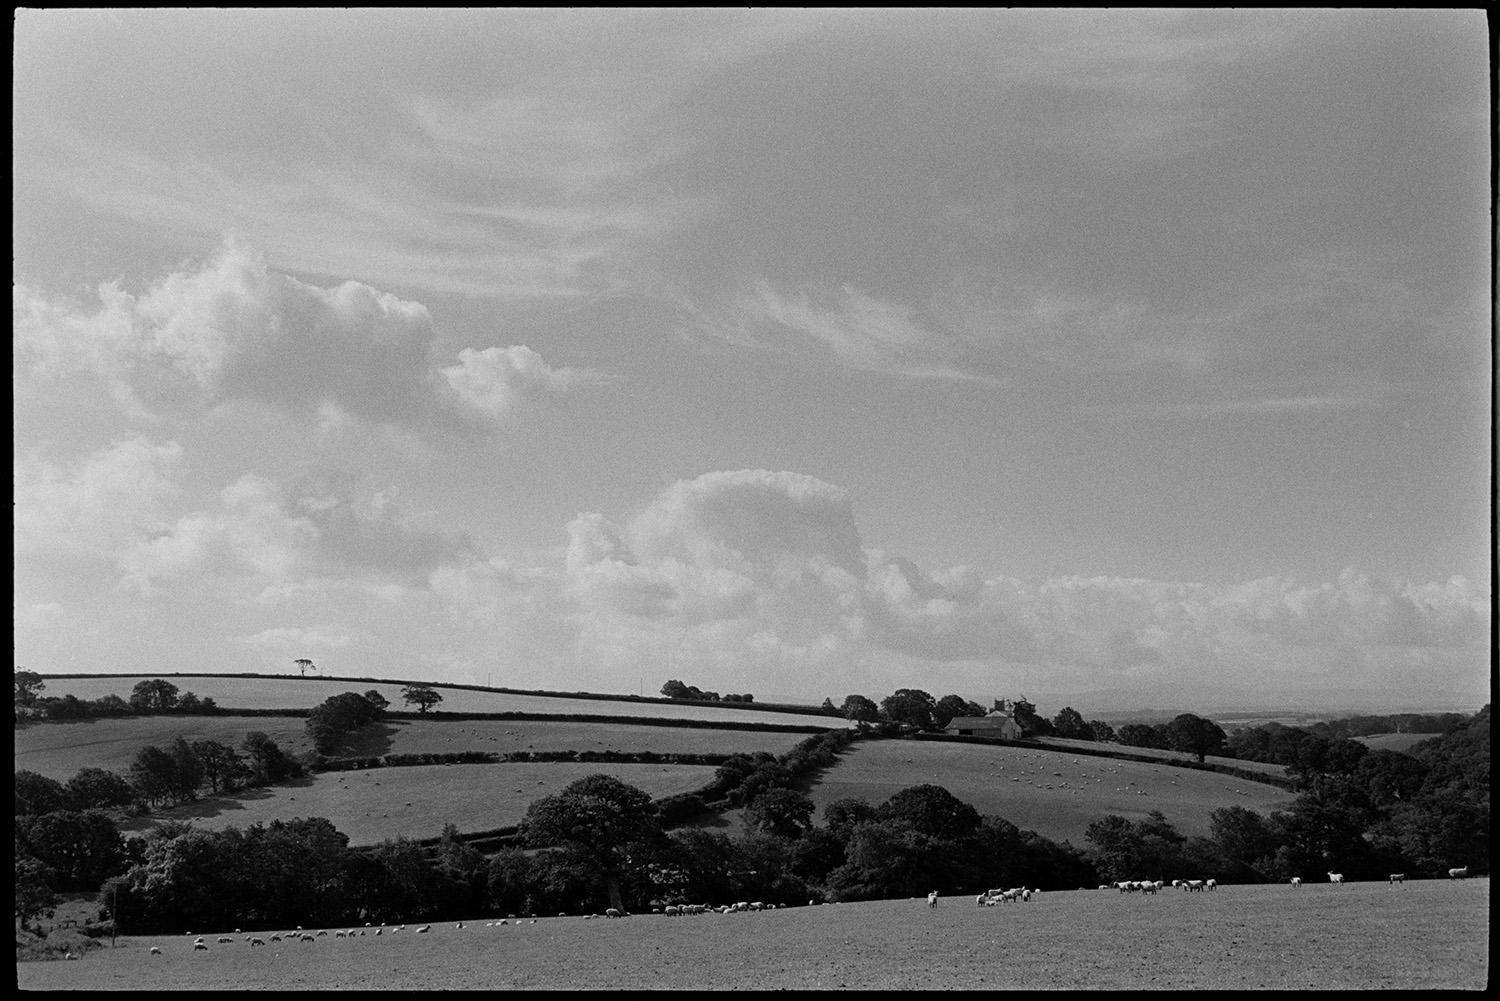 Cloudy landscape, shepherd farmer on motorbike checking sheep. Fine oak tree in field. 
[View of fields at Berry, Iddesleigh, showing field boundaries, hedges, trees, farm buildings, a church tower, sheep in a field in the foreground and cloud formations in the sky.]